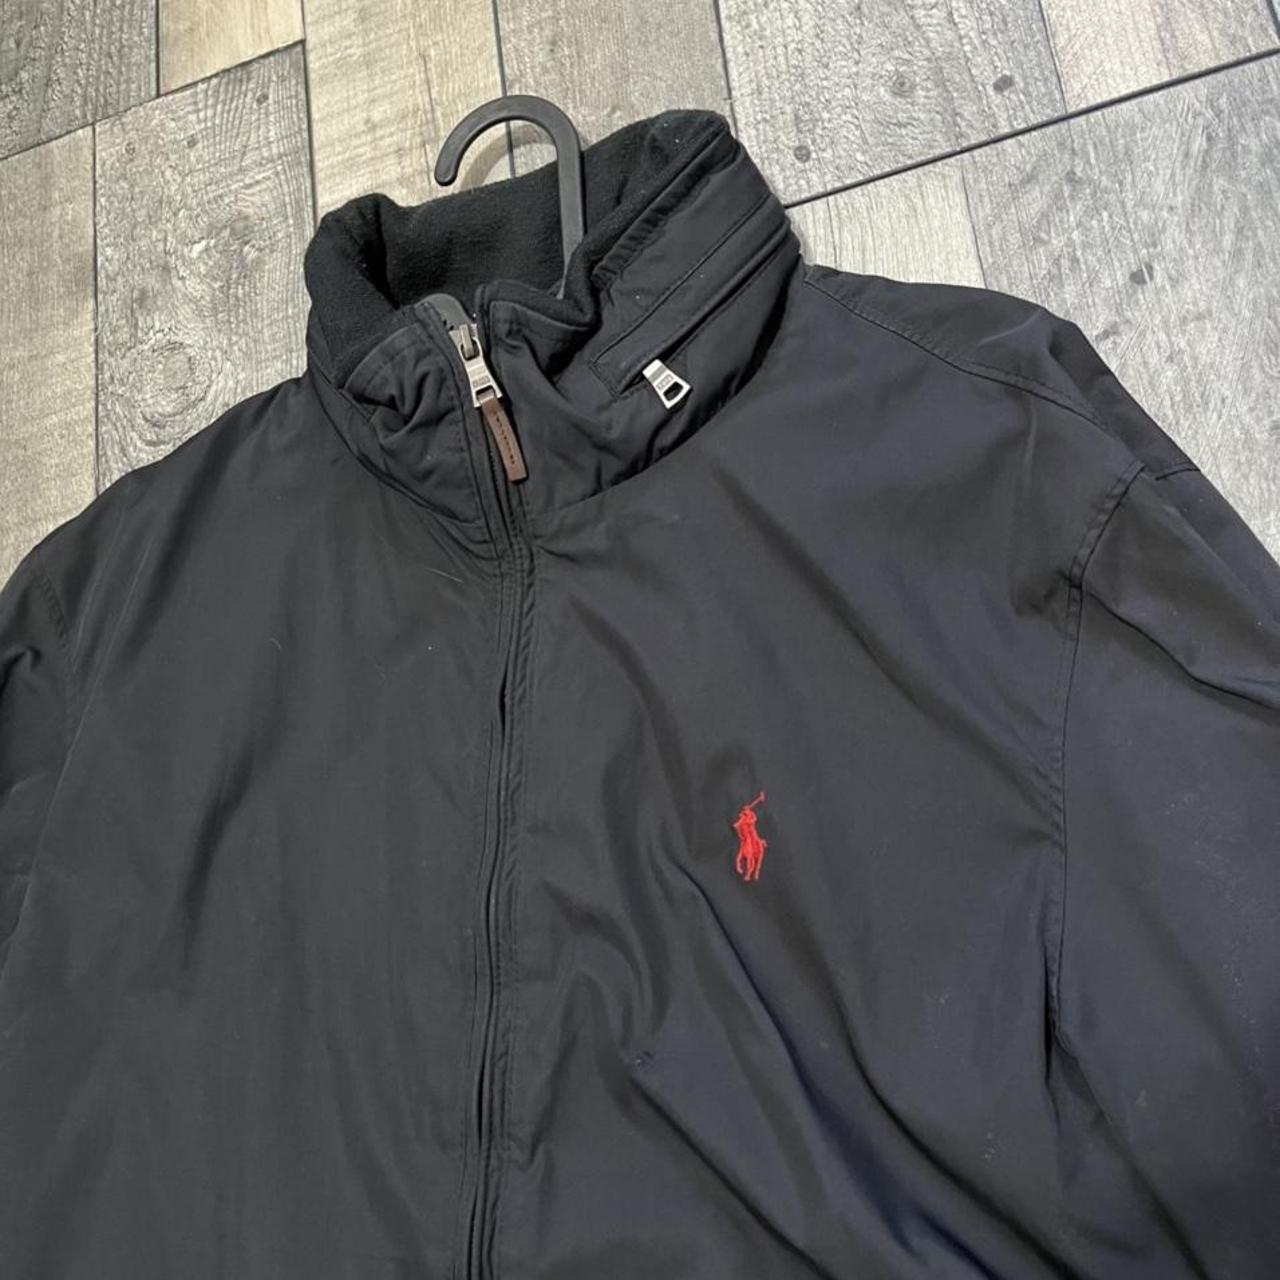 Mens Ralph Lauren jacket comes with hood that can be... - Depop